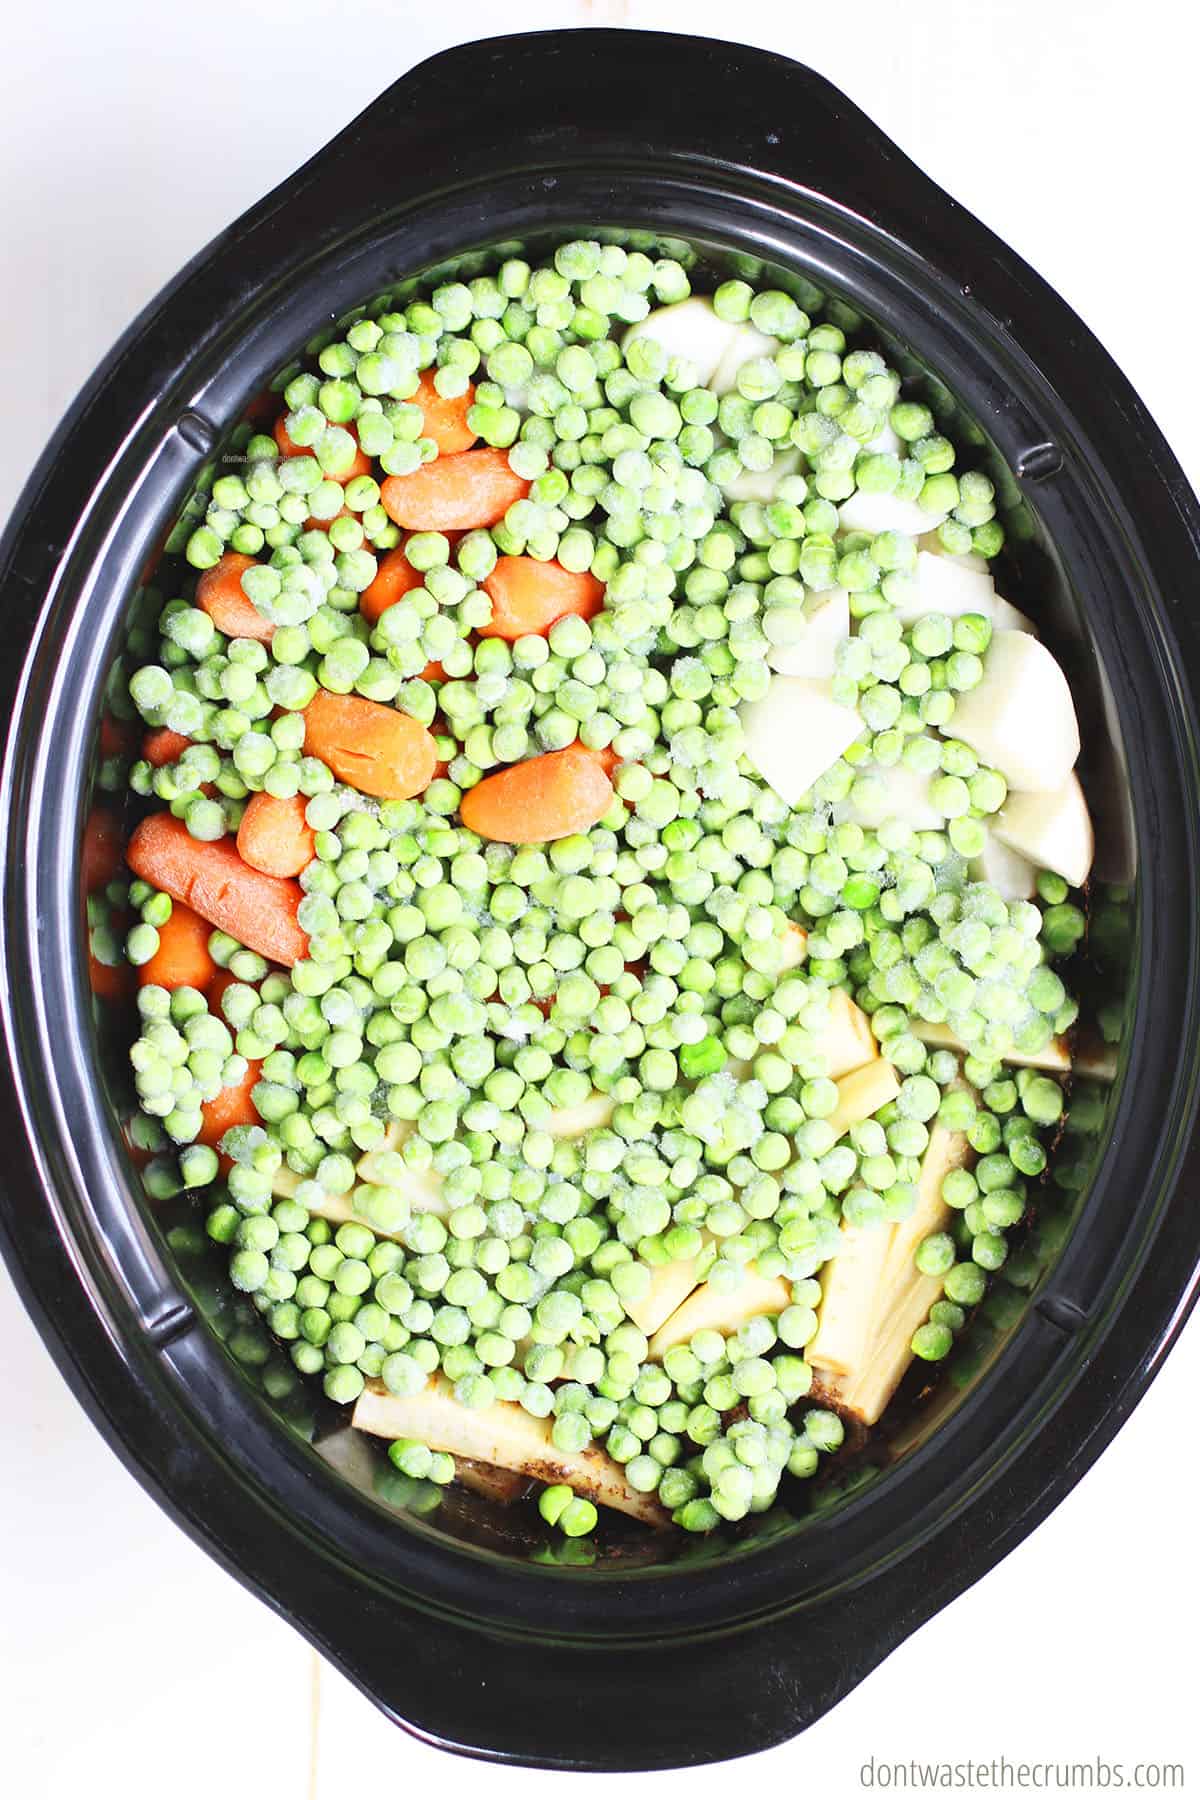 All of the ingredients for this slow cooker beef stew are in the crock pot. Pictured are frozen peas, carrots, parsnips, and turnips.